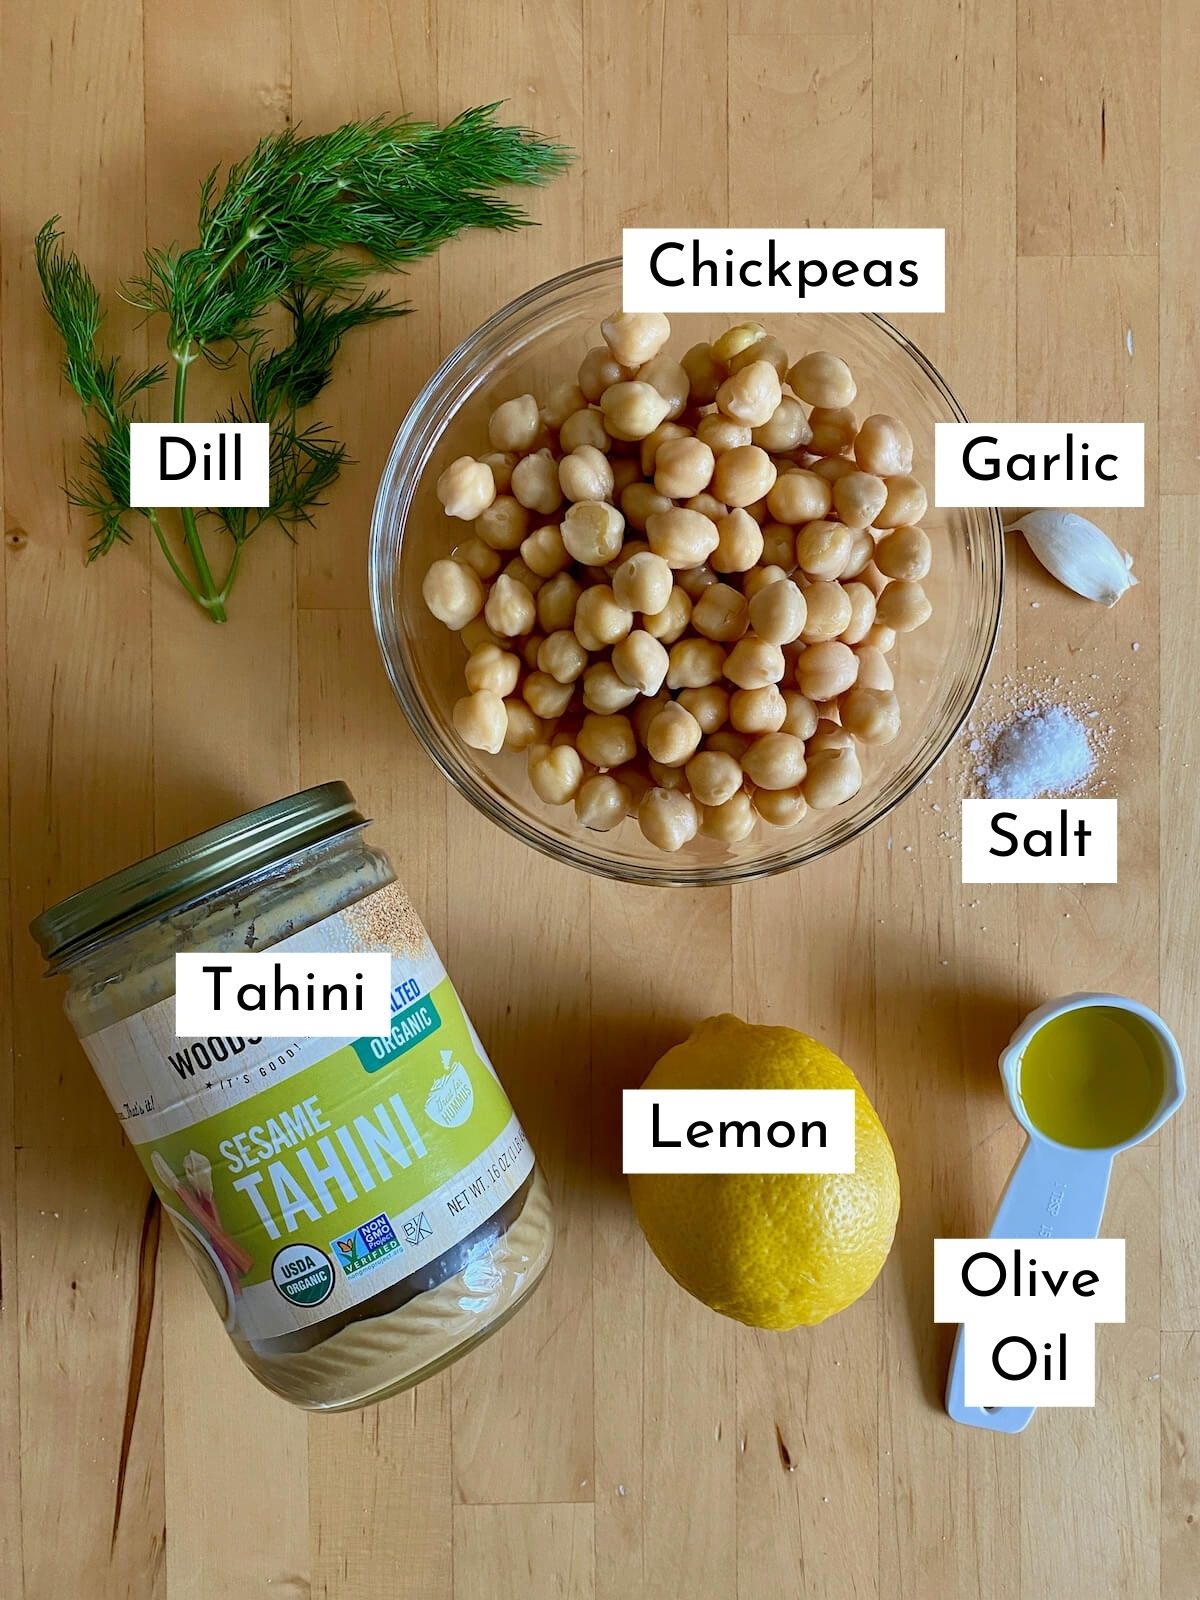 The ingredients to make lemon dill hummus. Each ingredient is labeled with text describing what it is. They include dill, chickpeas, garlic, tahini, salt, lemon, and olive oil.